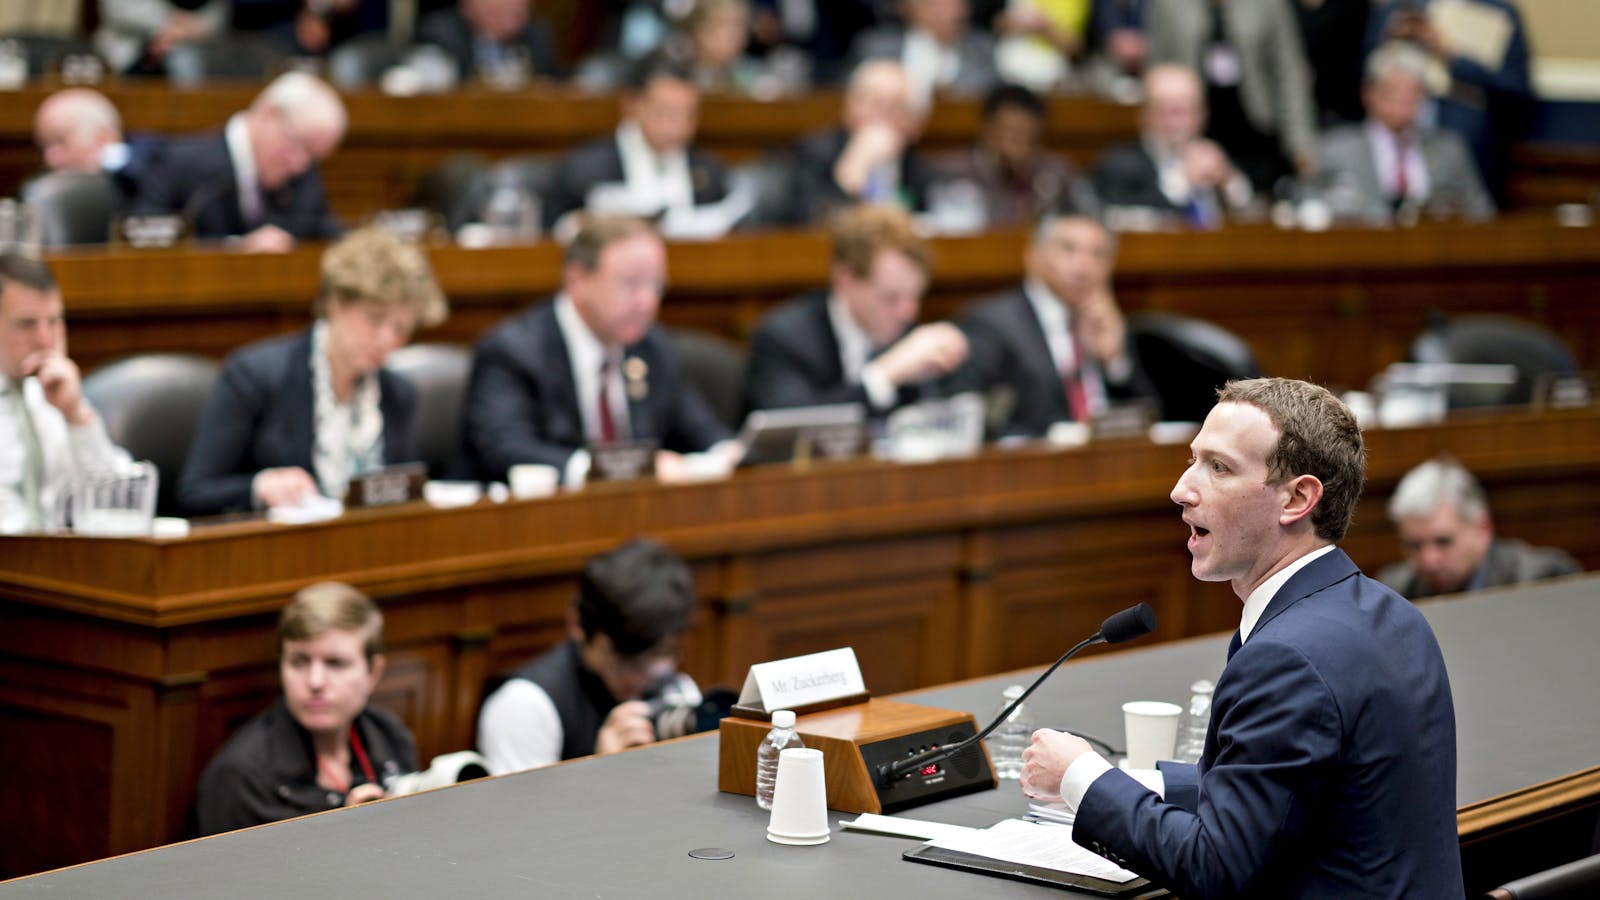 Facebook CEO Mark Zuckerberg speaks to a House committee on Wednesday. Photo by Bloomberg.